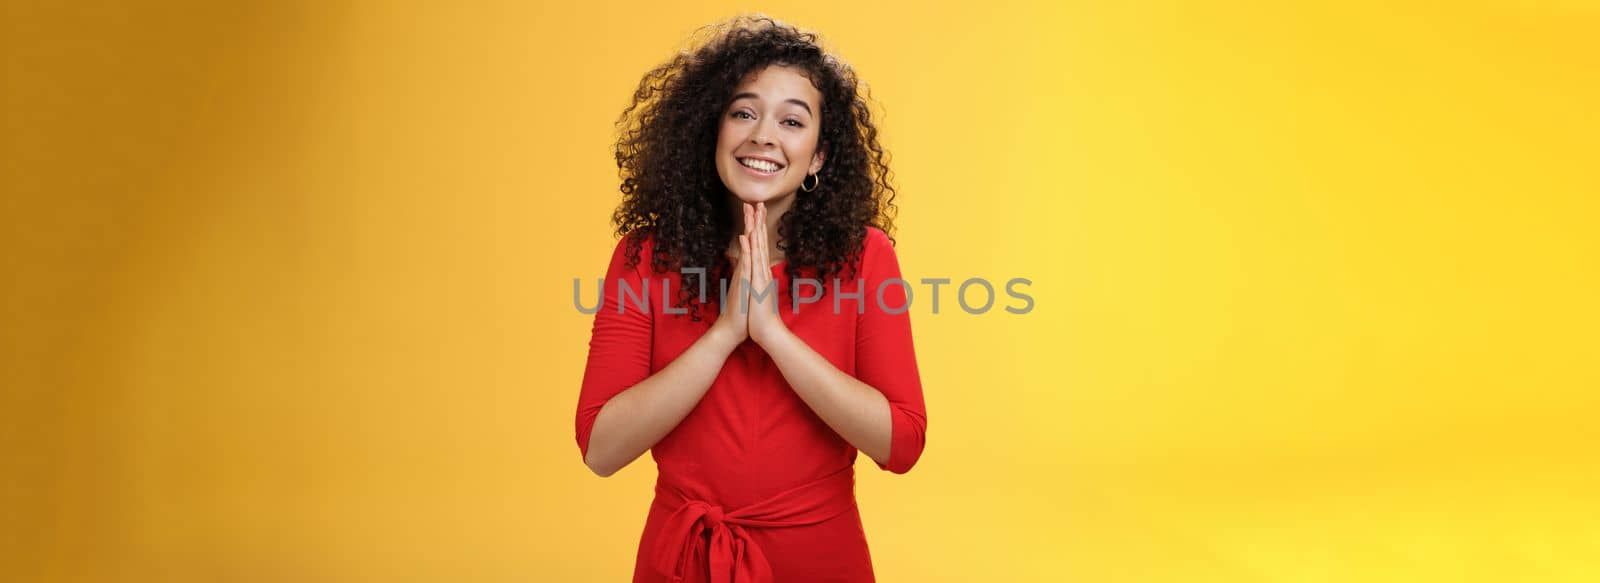 Girl with angel smile making eyes as wanting friend make favour, holding hands in pray, grinning and gazing with anticipation as begging for help standing silly and cute against yellow background by Benzoix